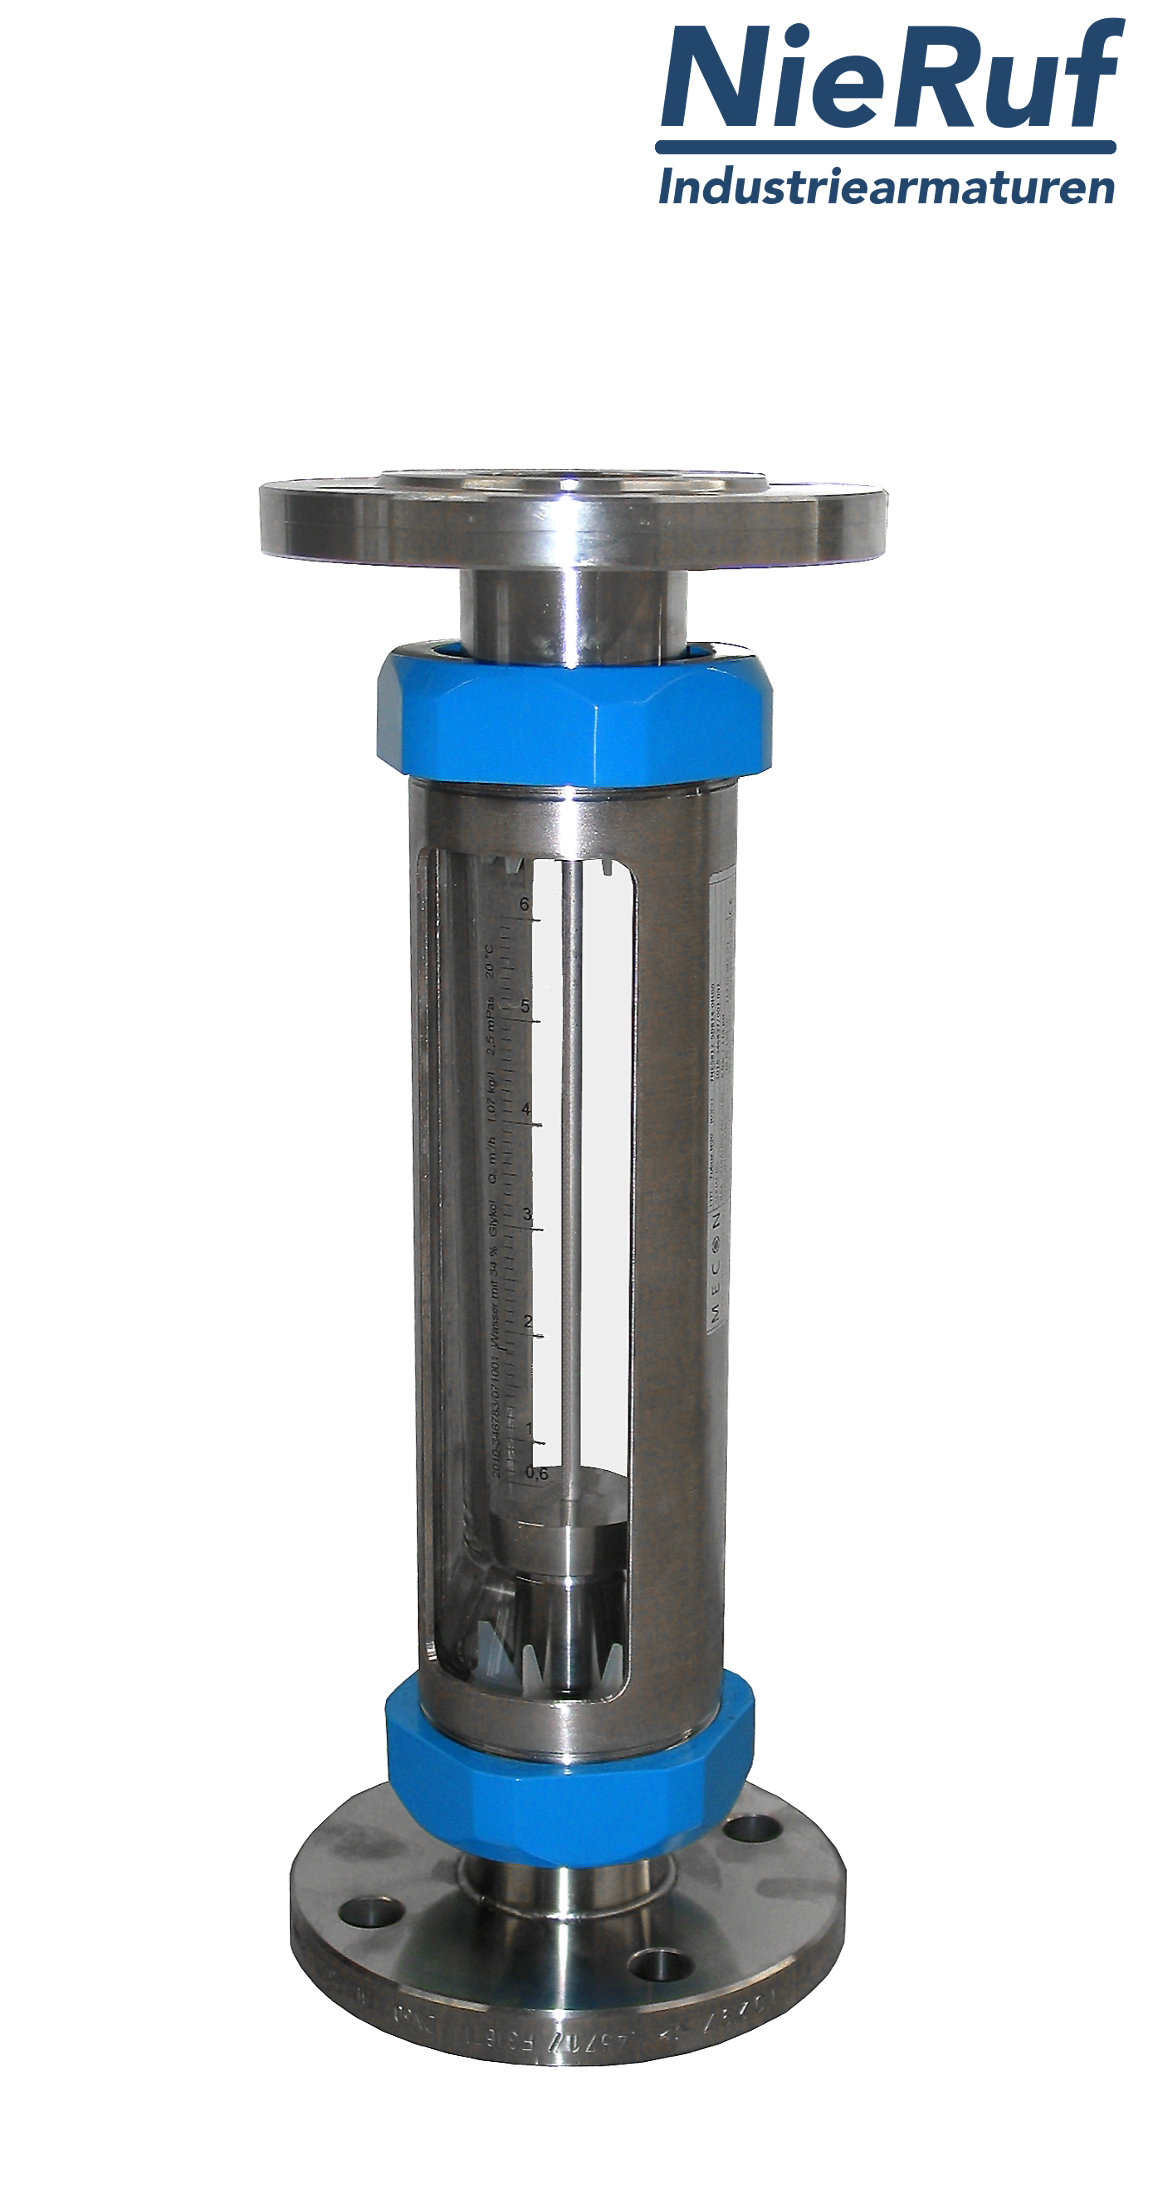 Variable area flowmeter stainless steel + borosilicate flange DN10 1.0 - 10.0 l/h water FKM